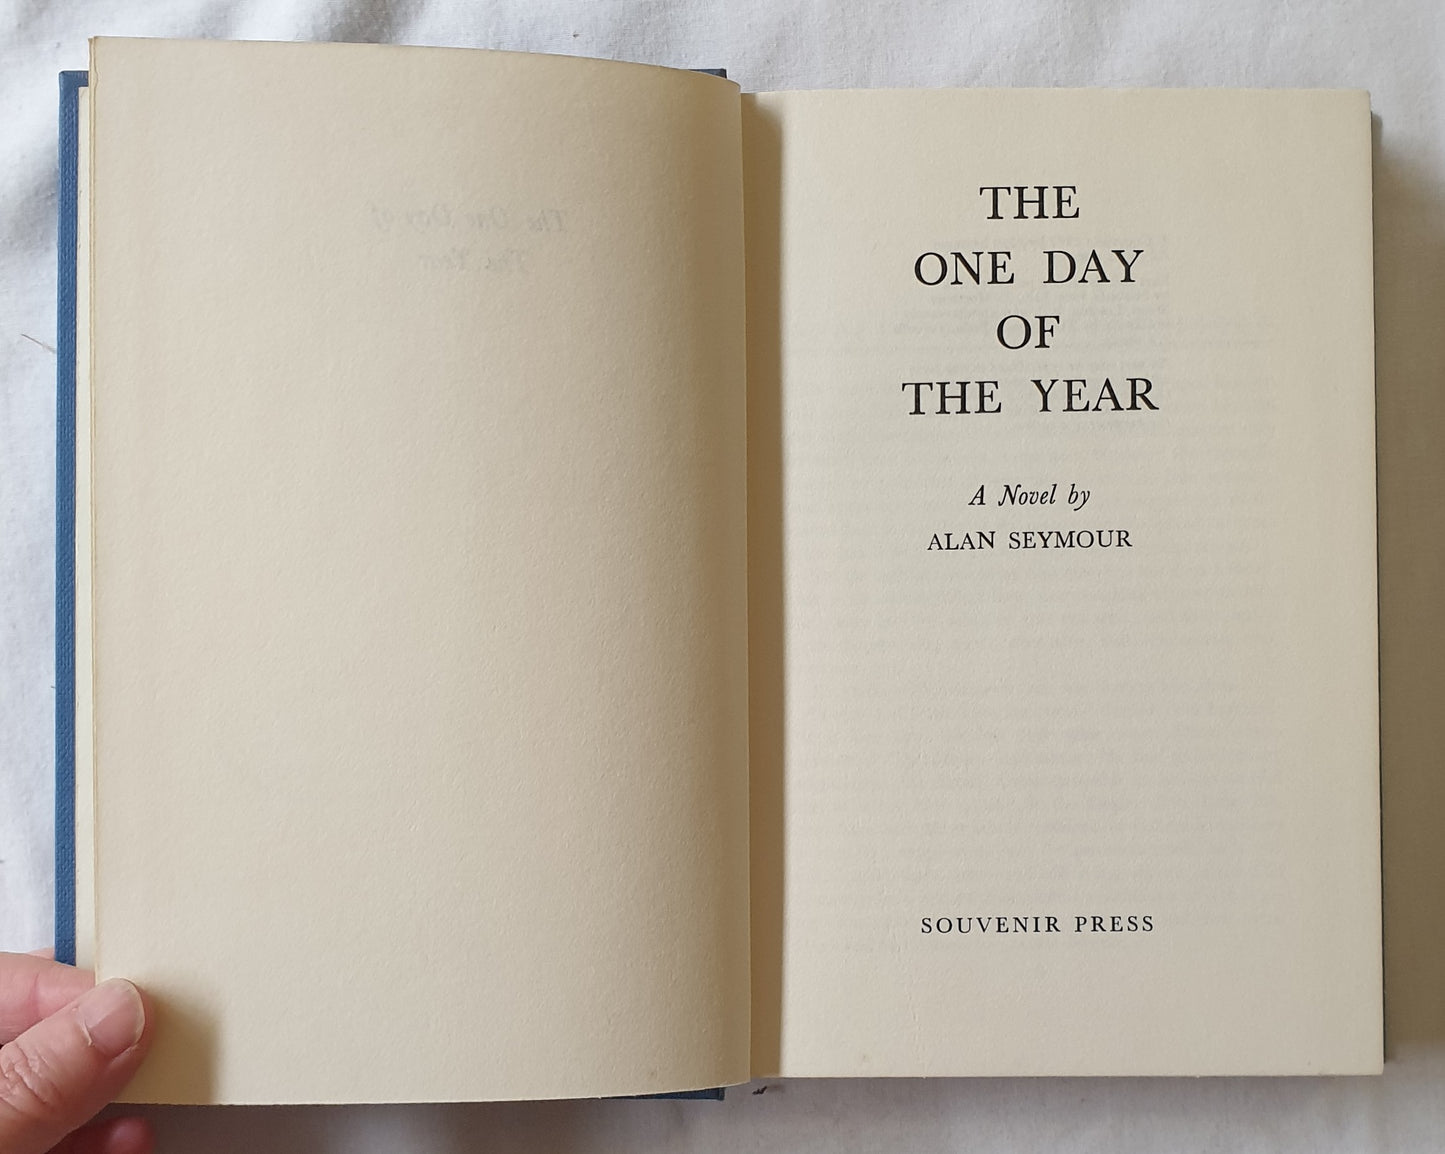 The One Day of the Year by Alan Seymour